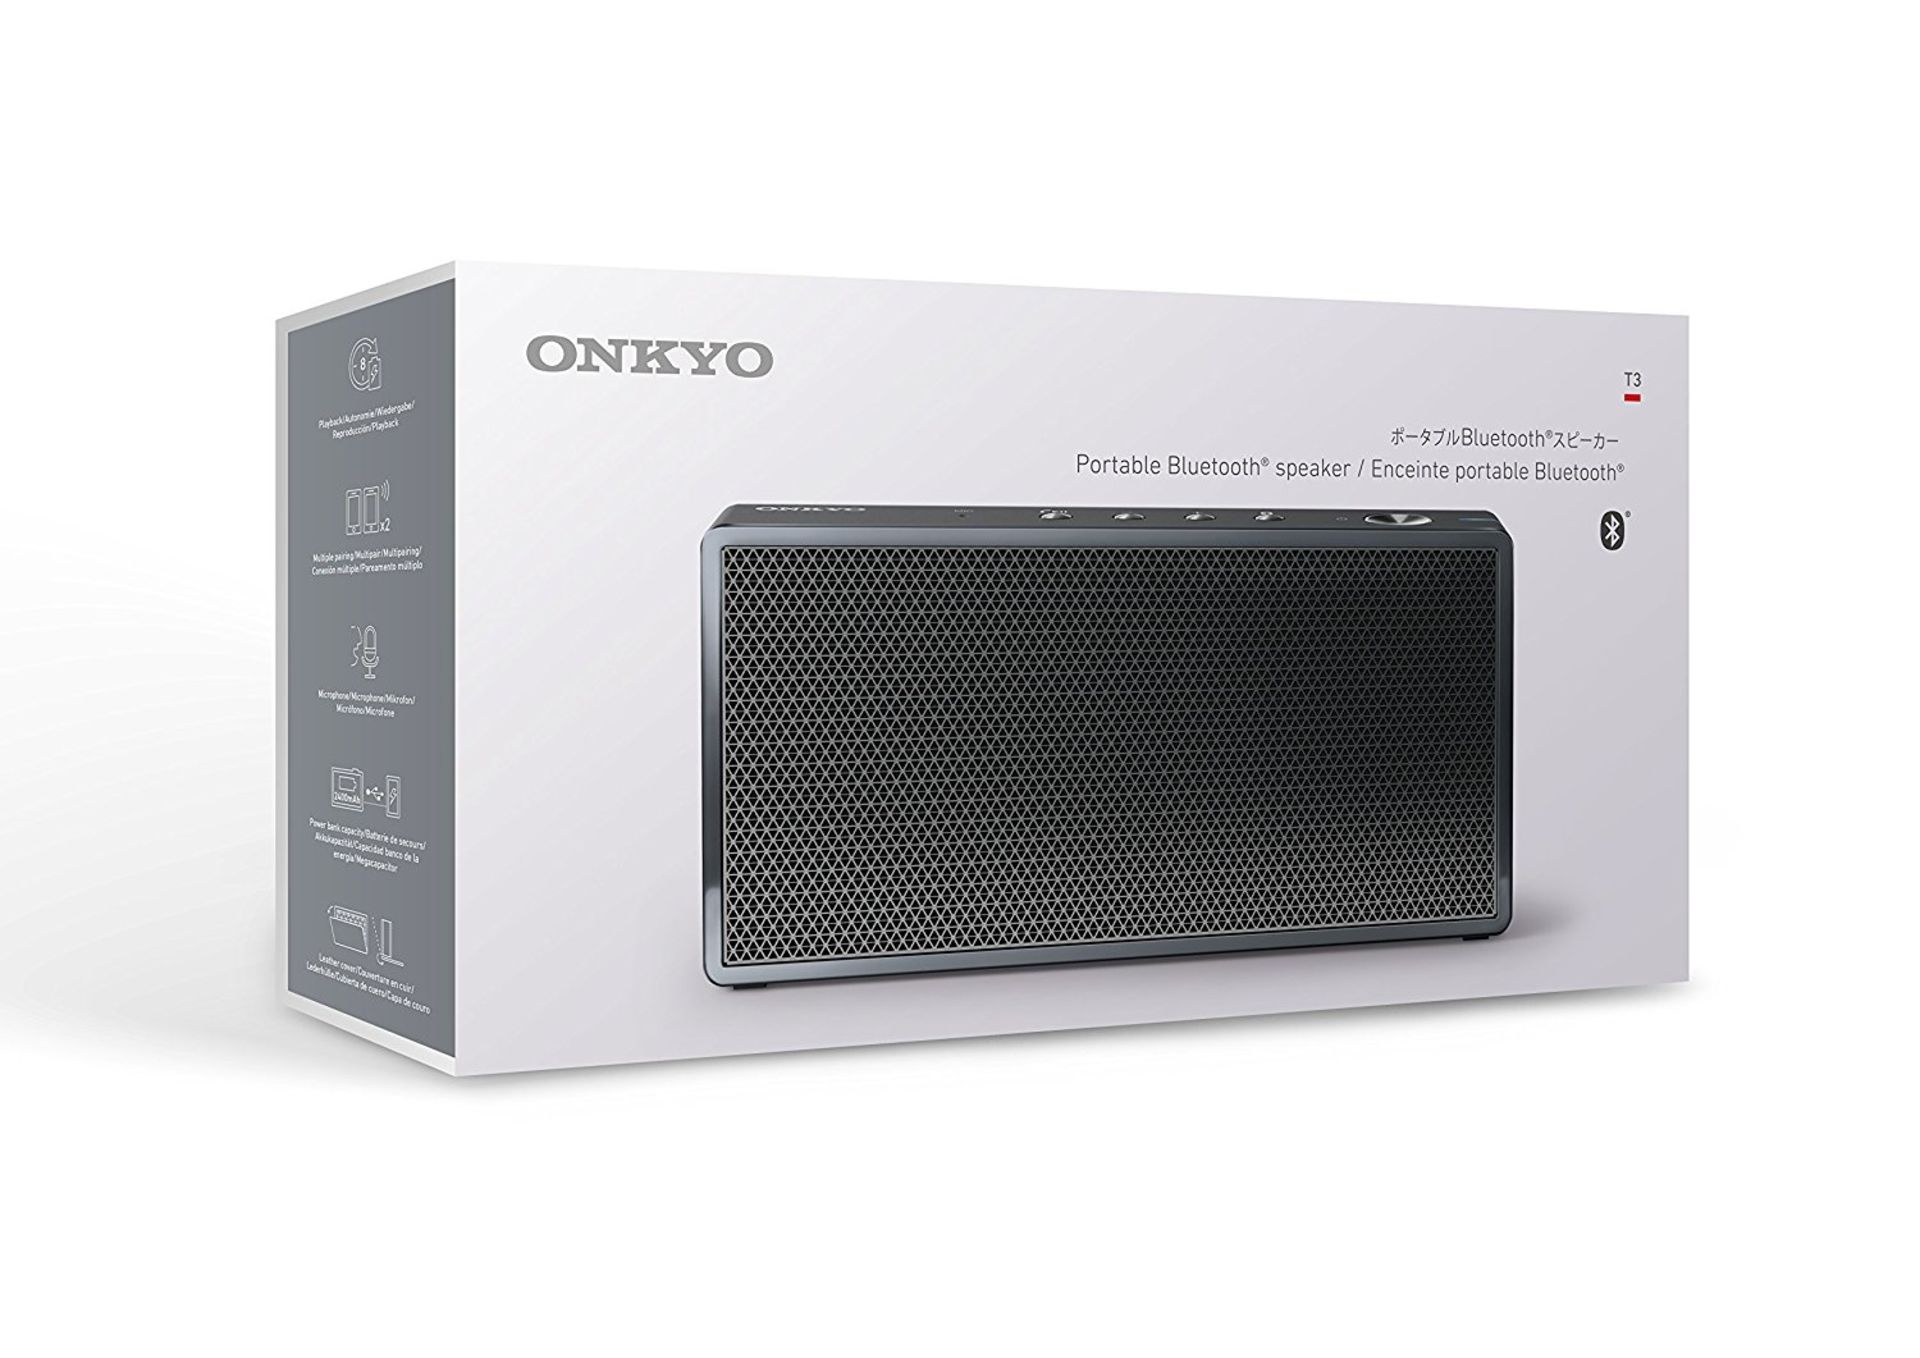 V Brand New Onkyo T3 Lightweight Portable Bluetooth Speaker with USB output for Charging Devices - 8 - Image 3 of 4